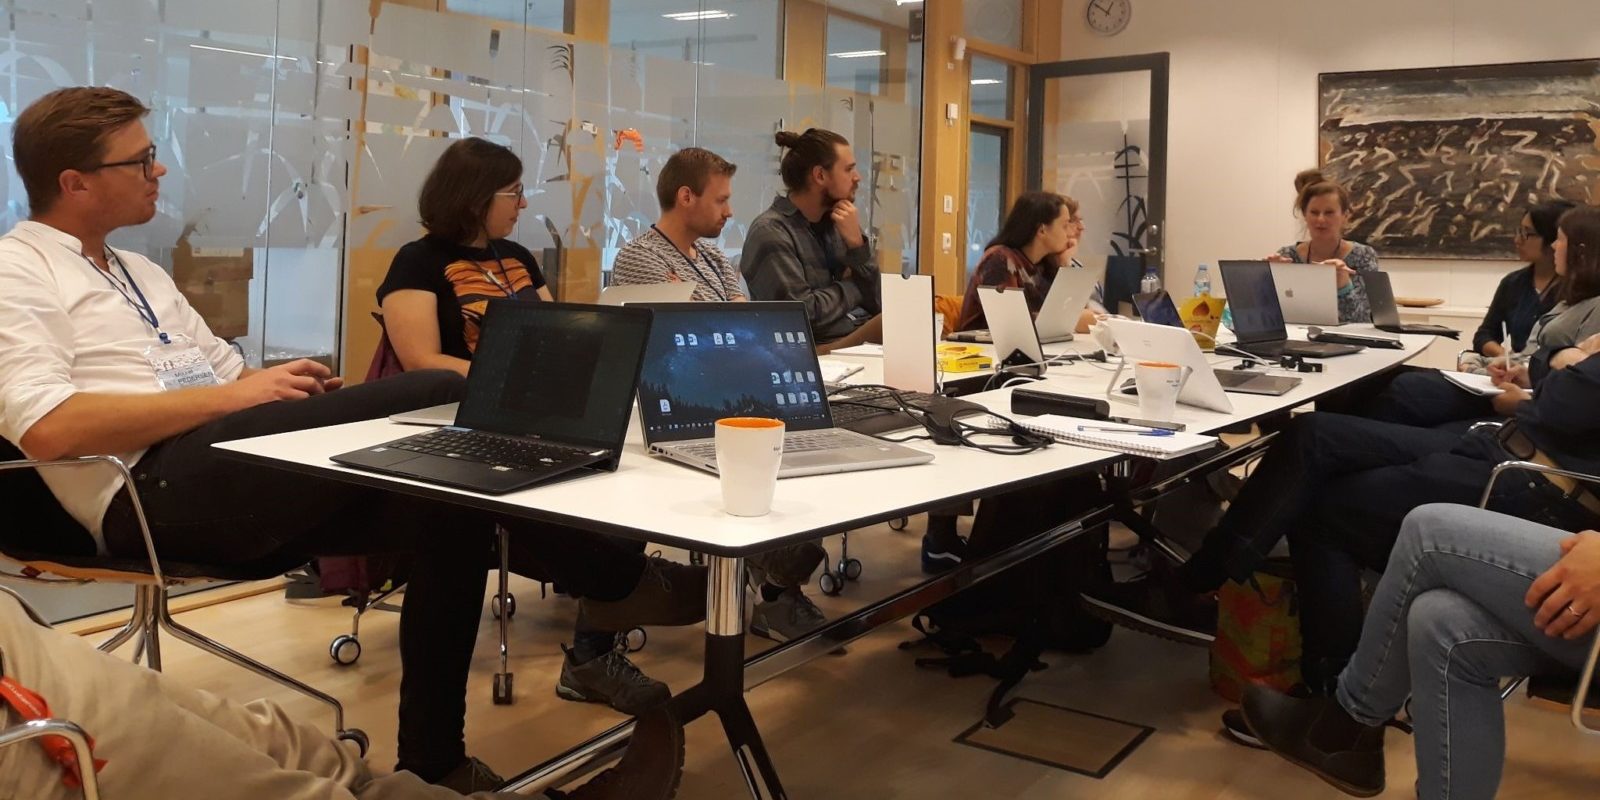 A group of people working together on laptops around a table in a room.